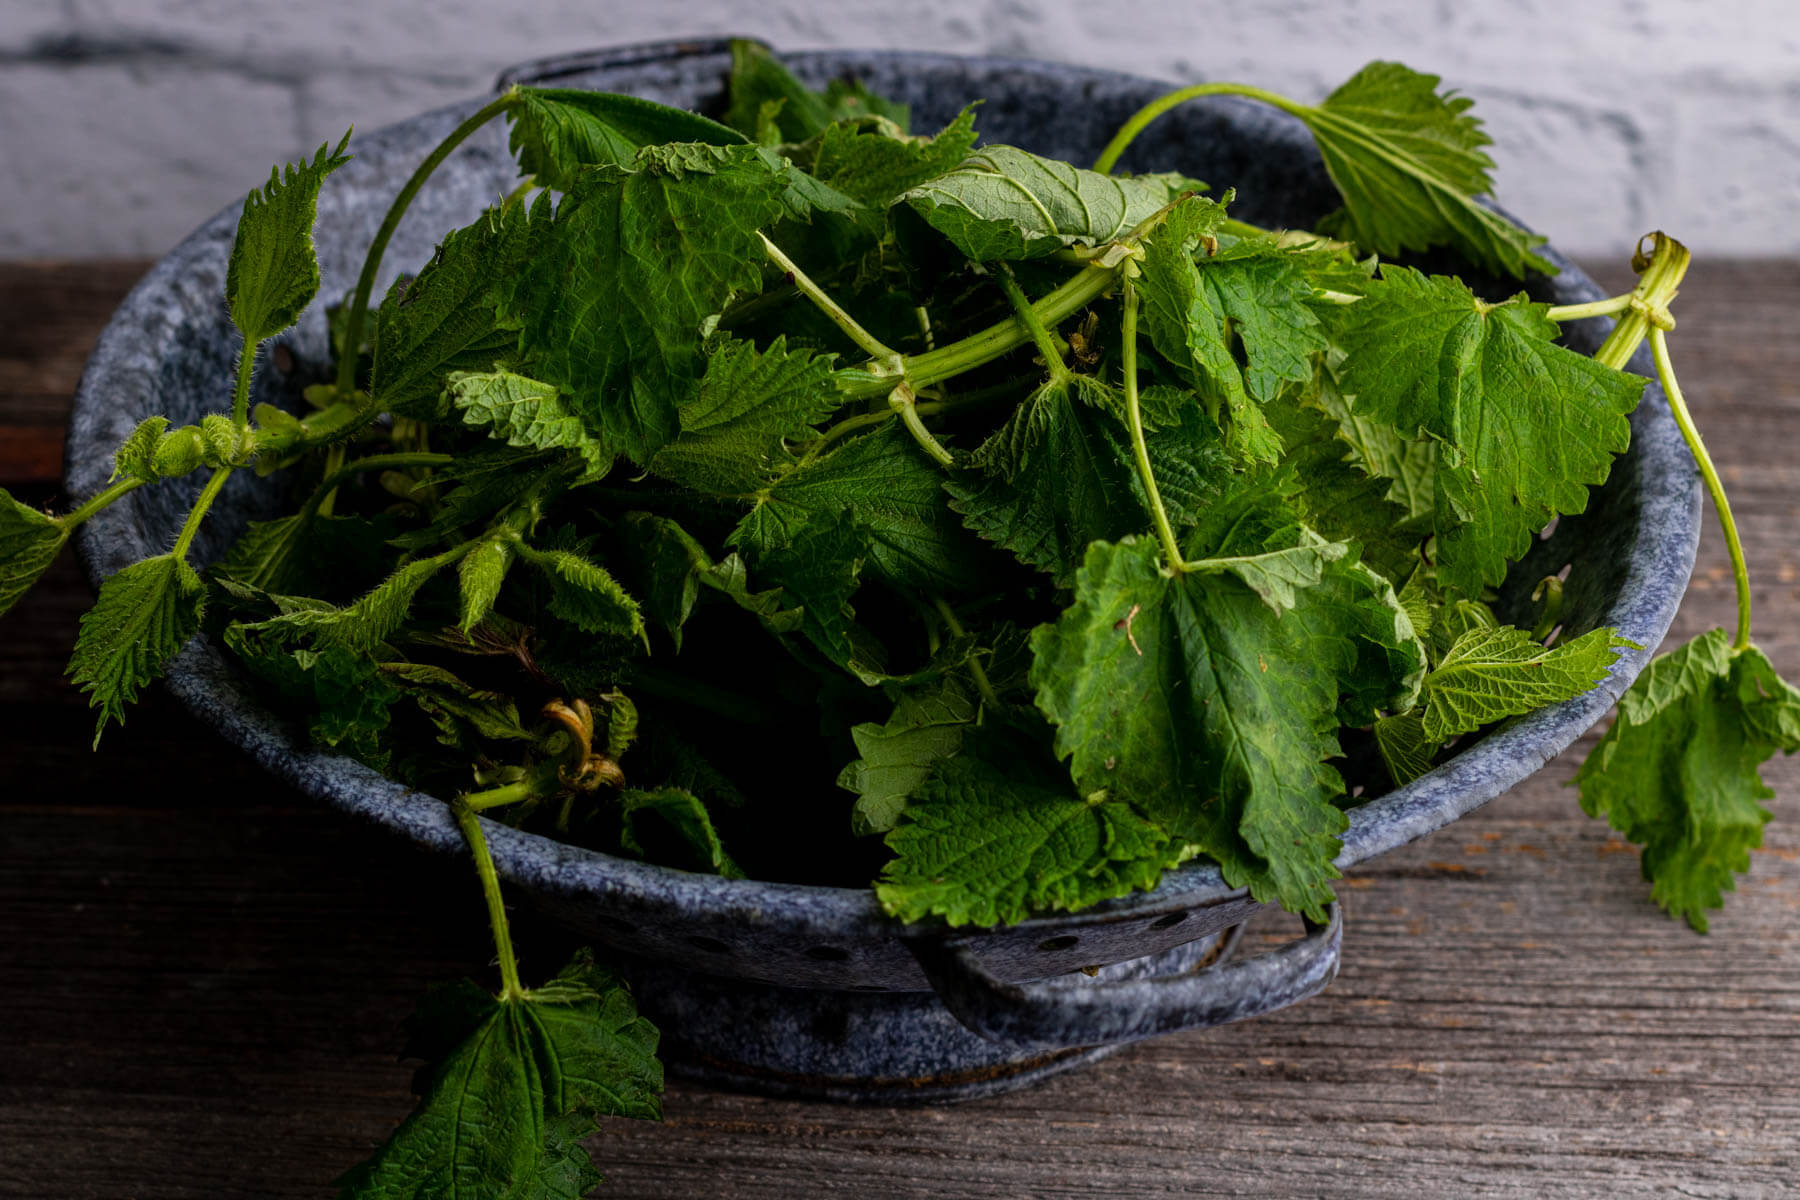 A blue colander filled with fresh green Stinging Nettle leaves.